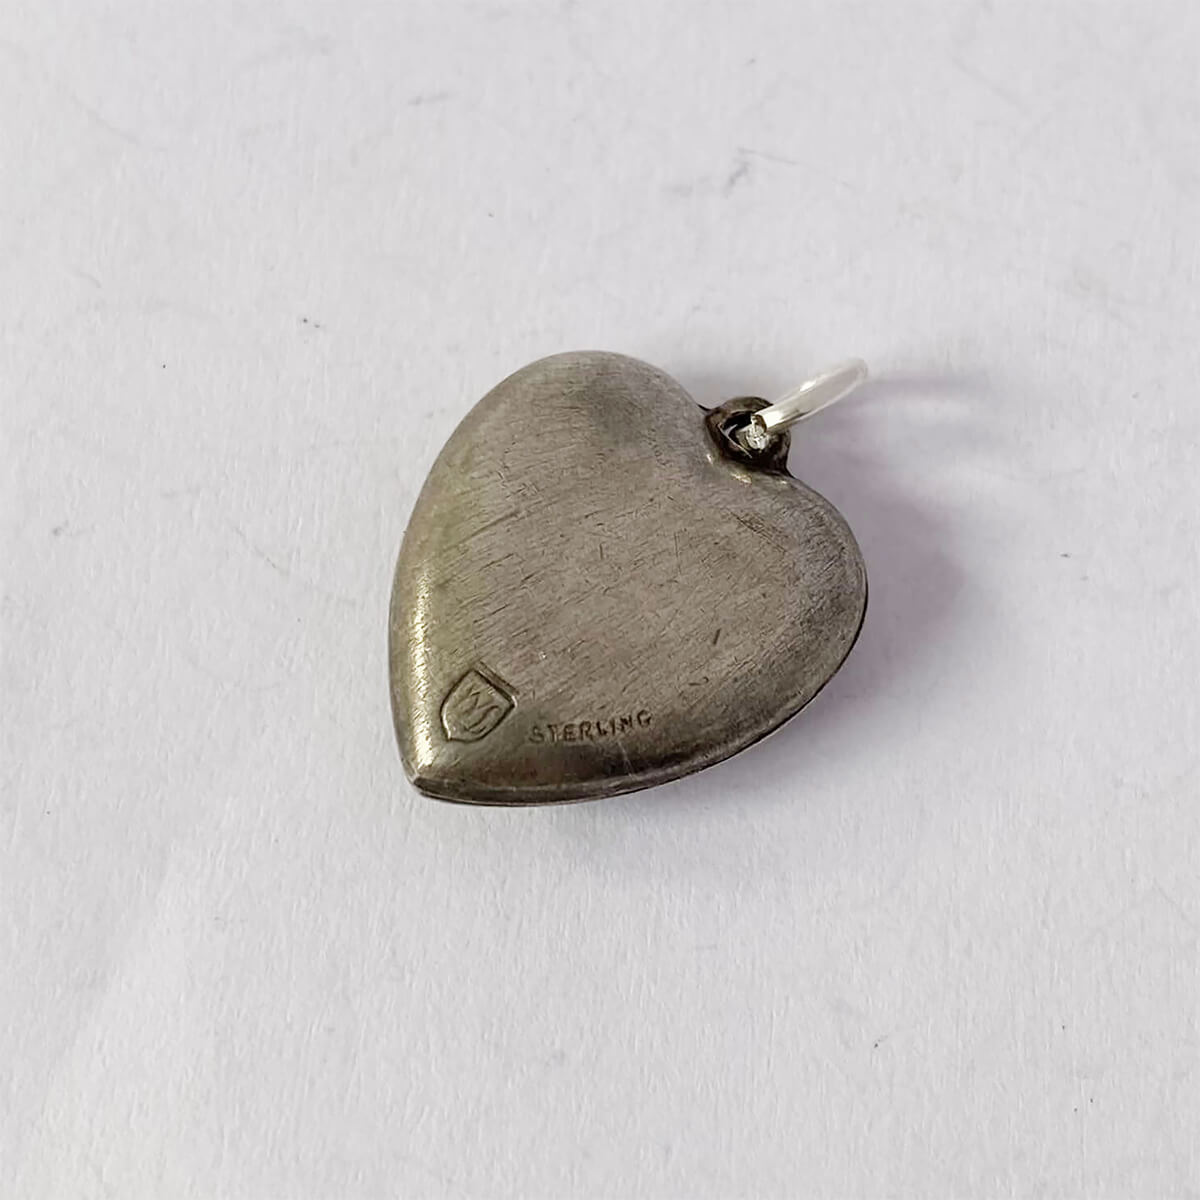 Vintage 1940s sterling silver repousse Walter Lampl puffy heart charm